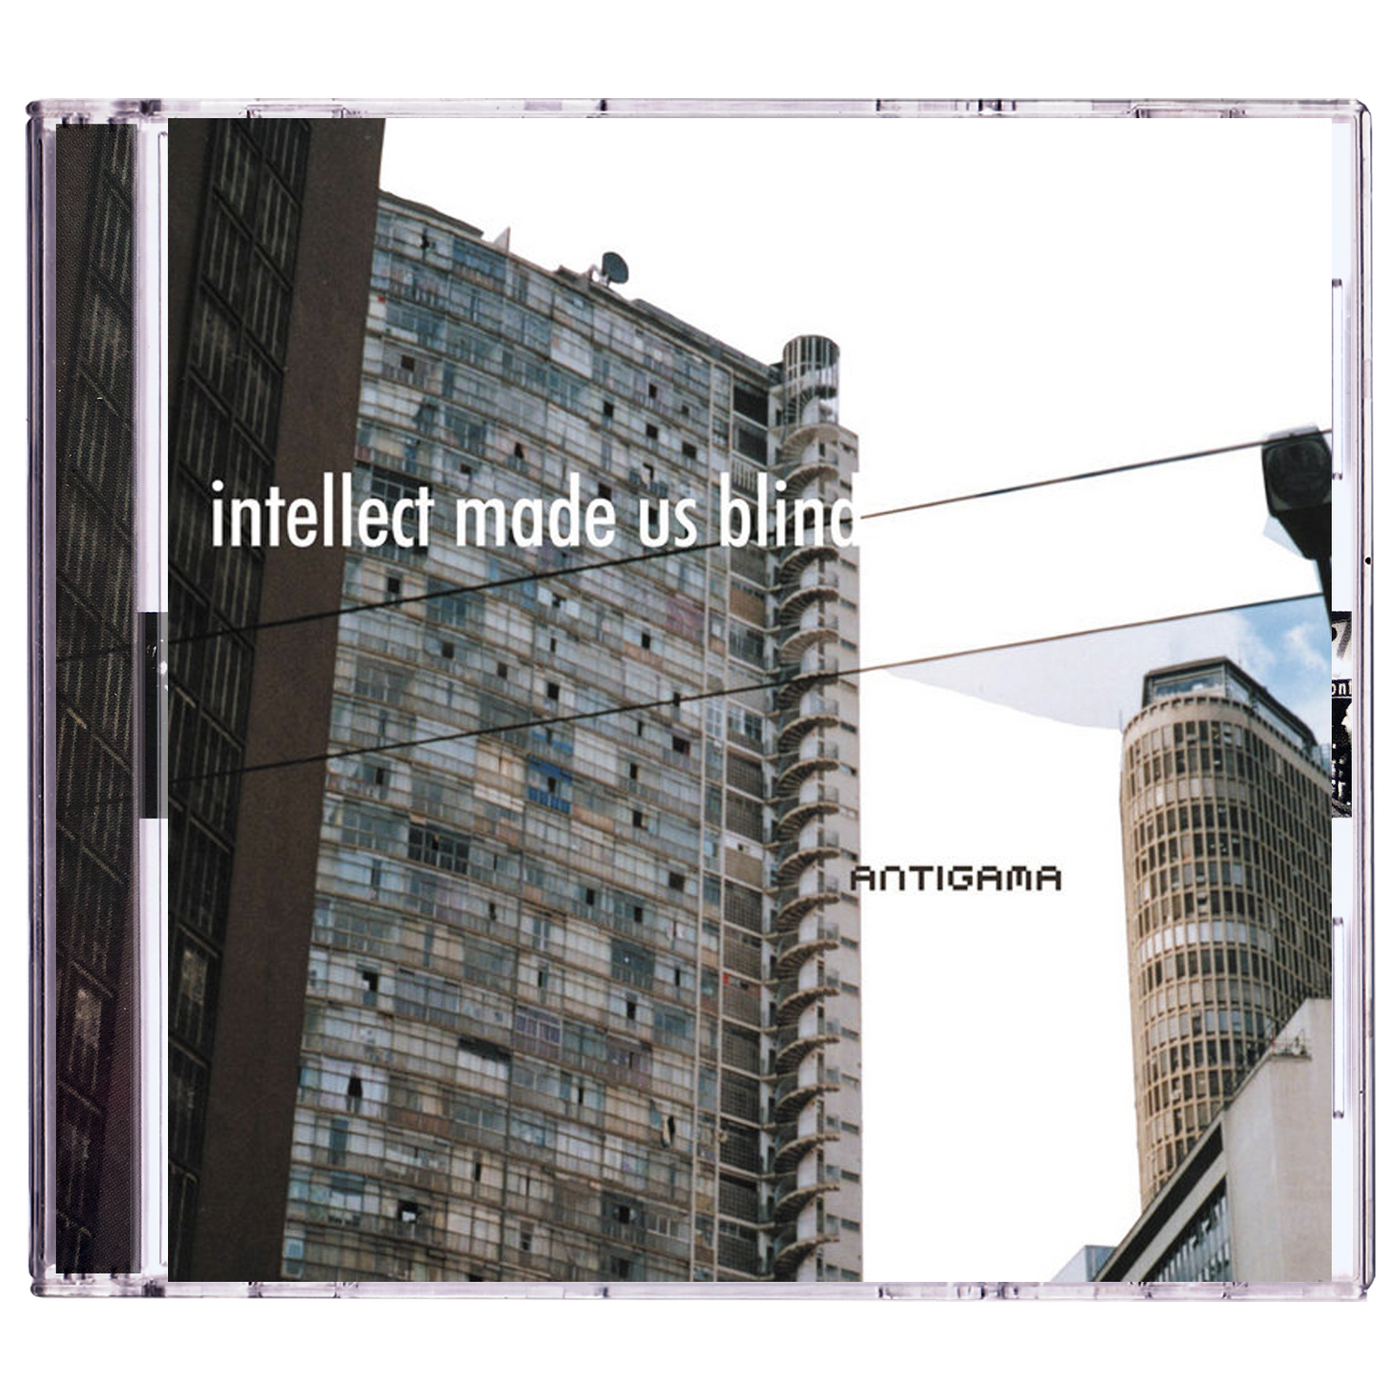 Antigama 'Intellect Made Us Blind' CD